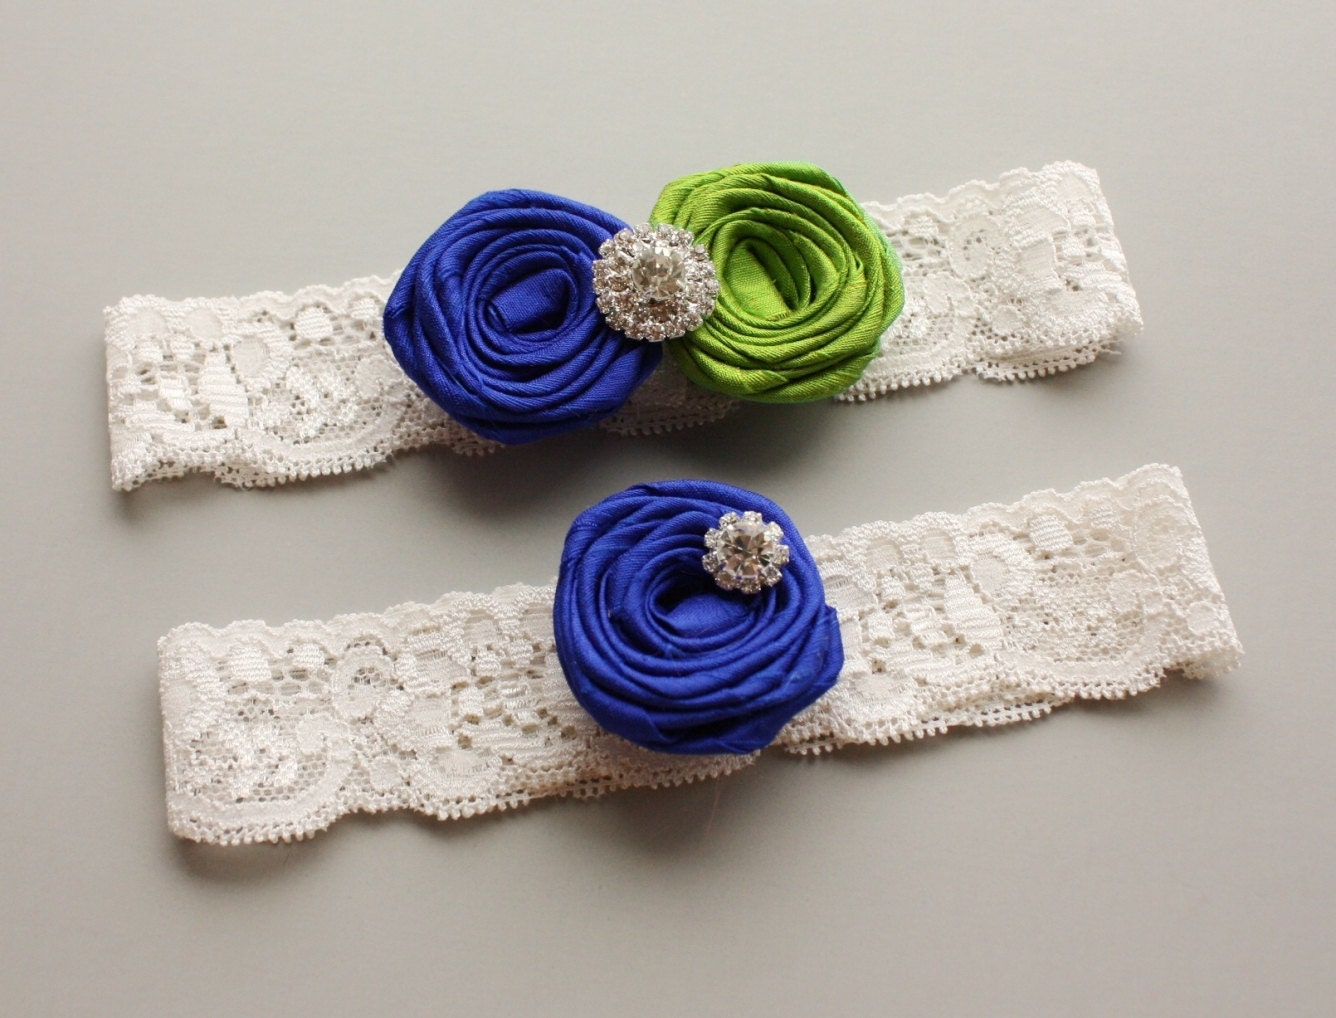 CHOOSE YOUR COLORS - Ivory Lace Bridal Garter Set with Royal Blue & Apple Green Silk Roses - Wedding Garter with Toss Garter - "Chloe"